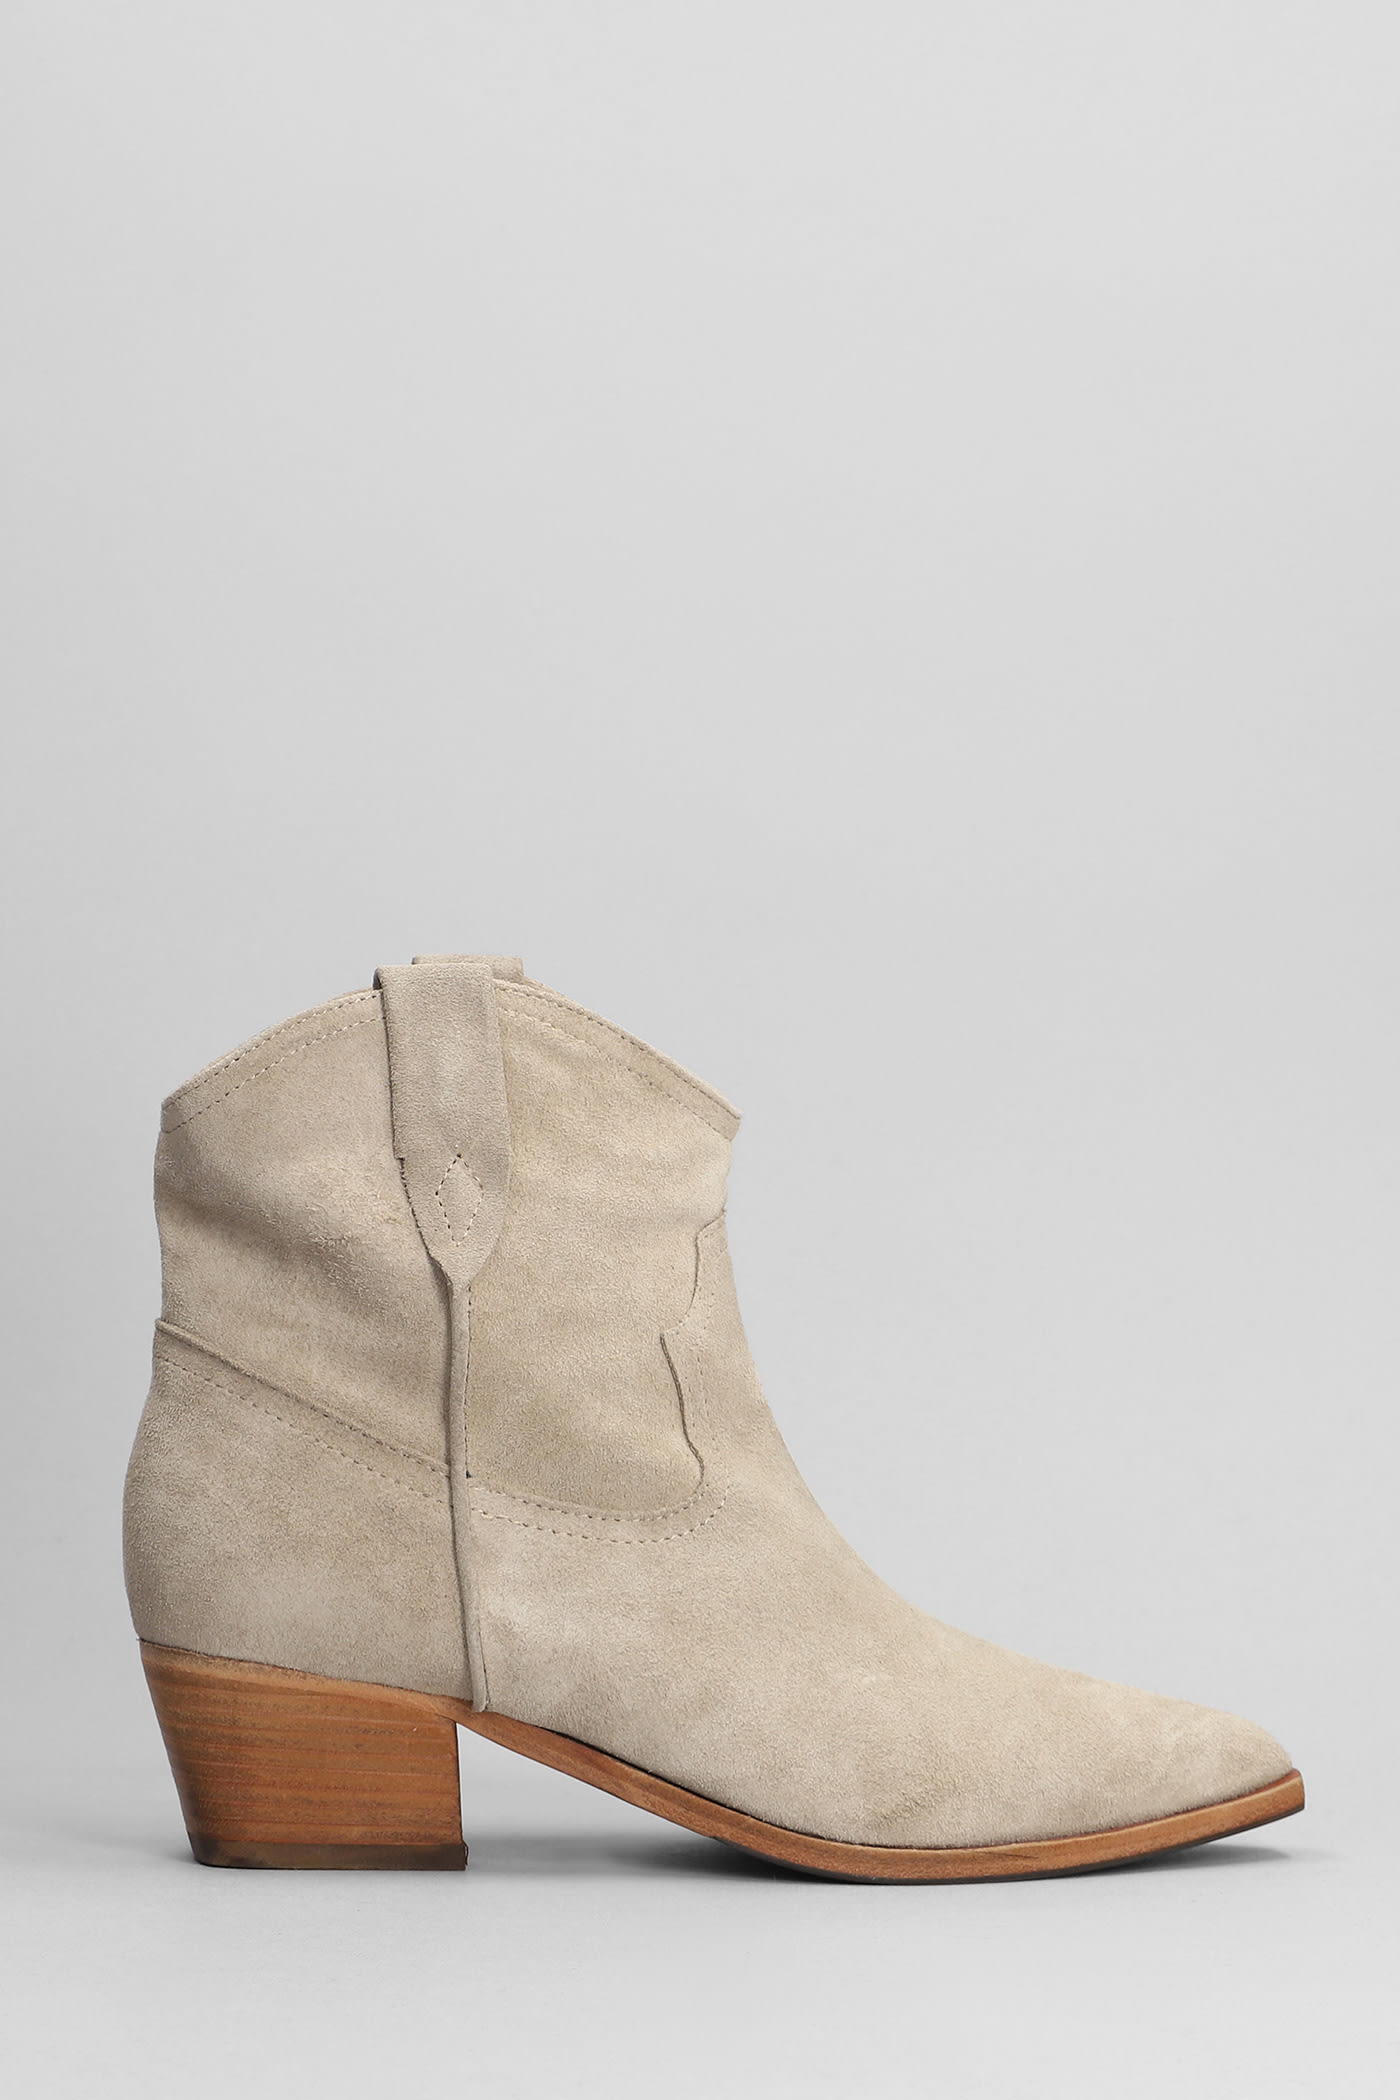 Julie Dee Texan Ankle Boots In Taupe Suede